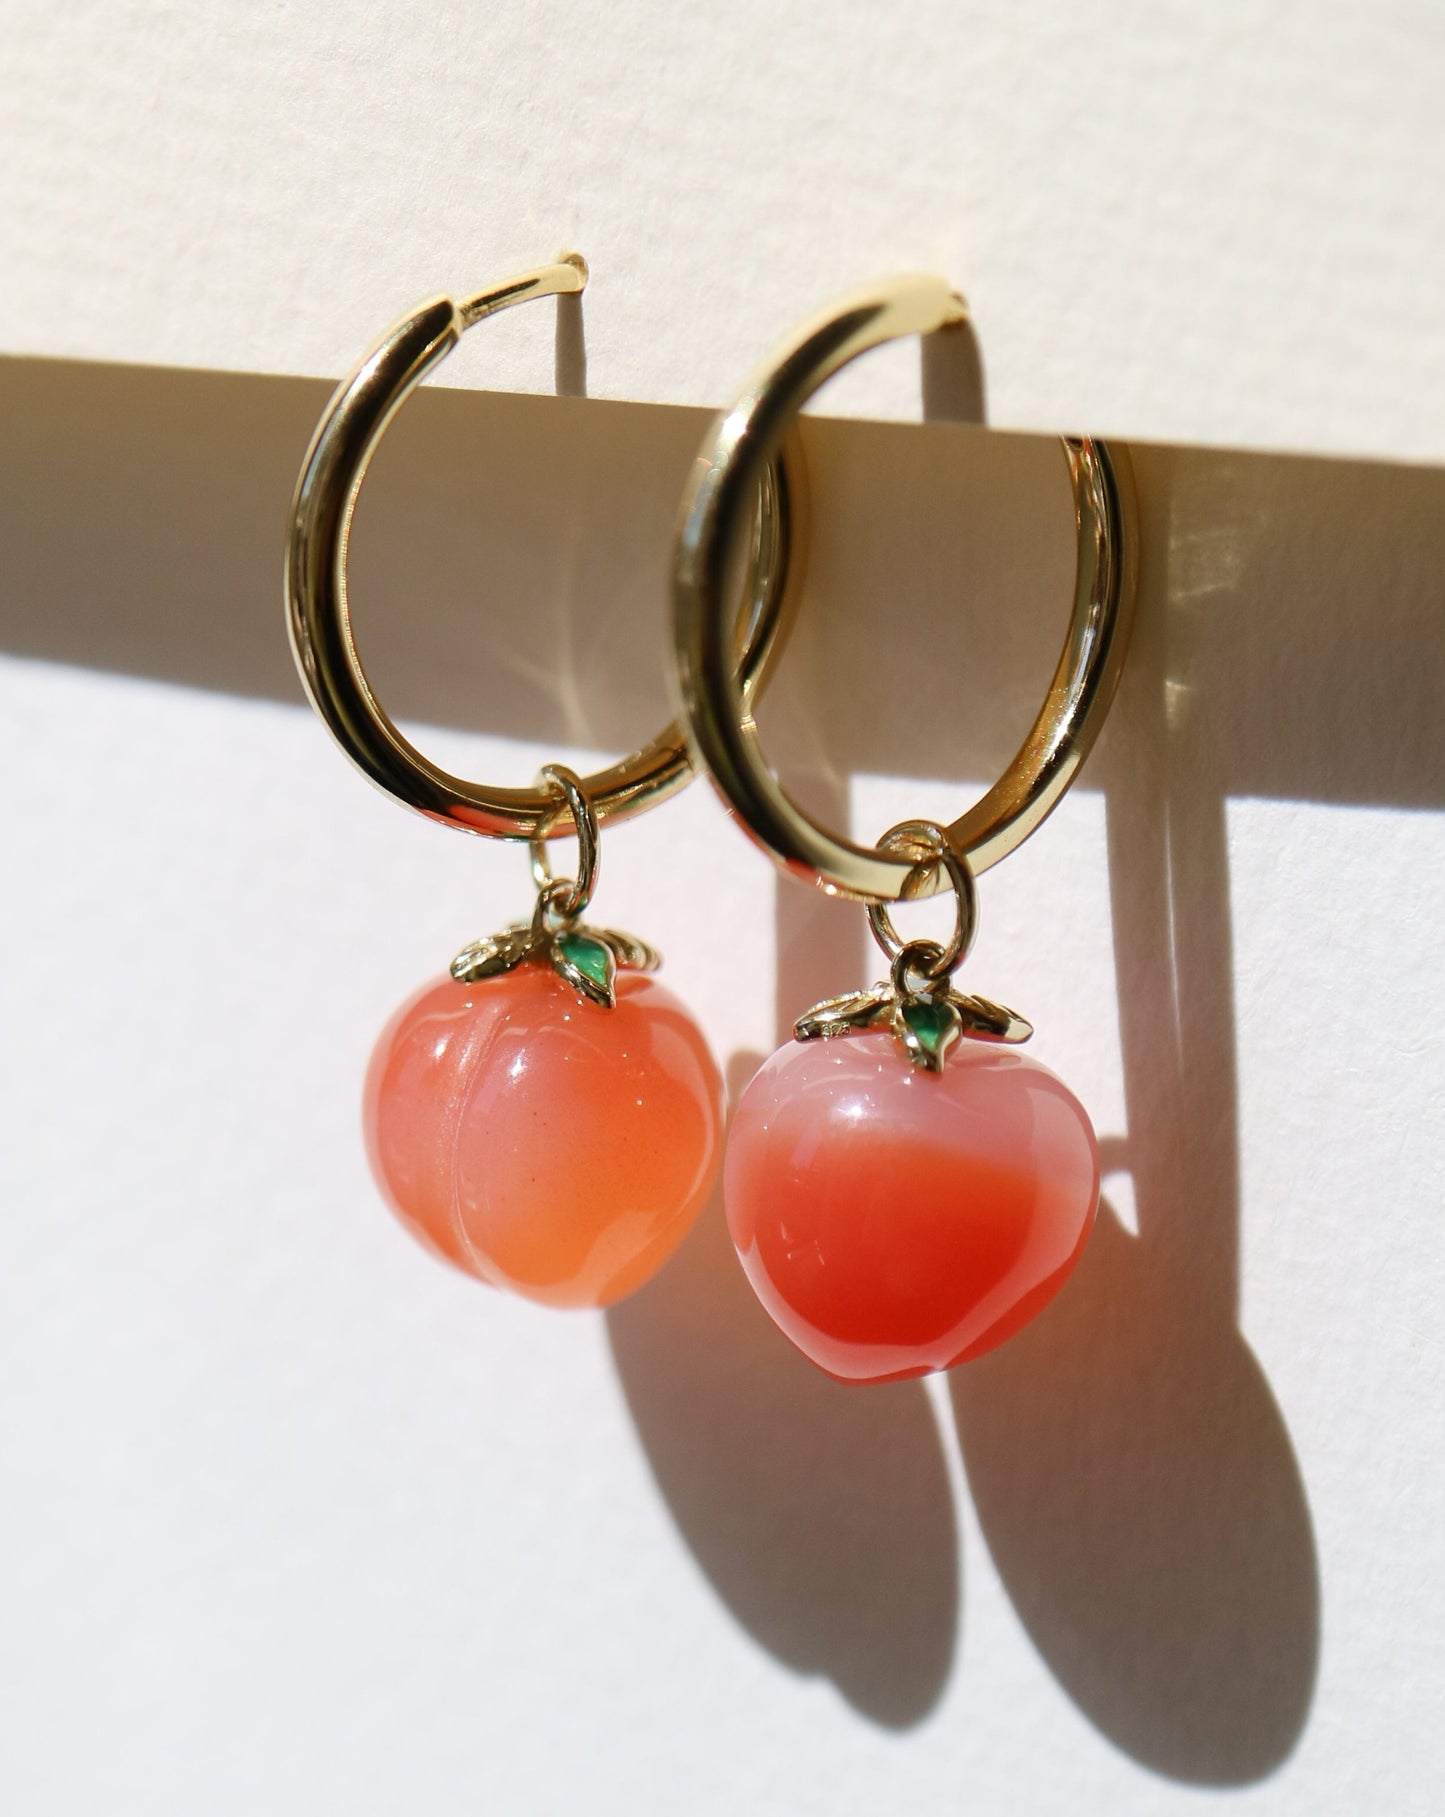 Just Peachy Charm for jewellery